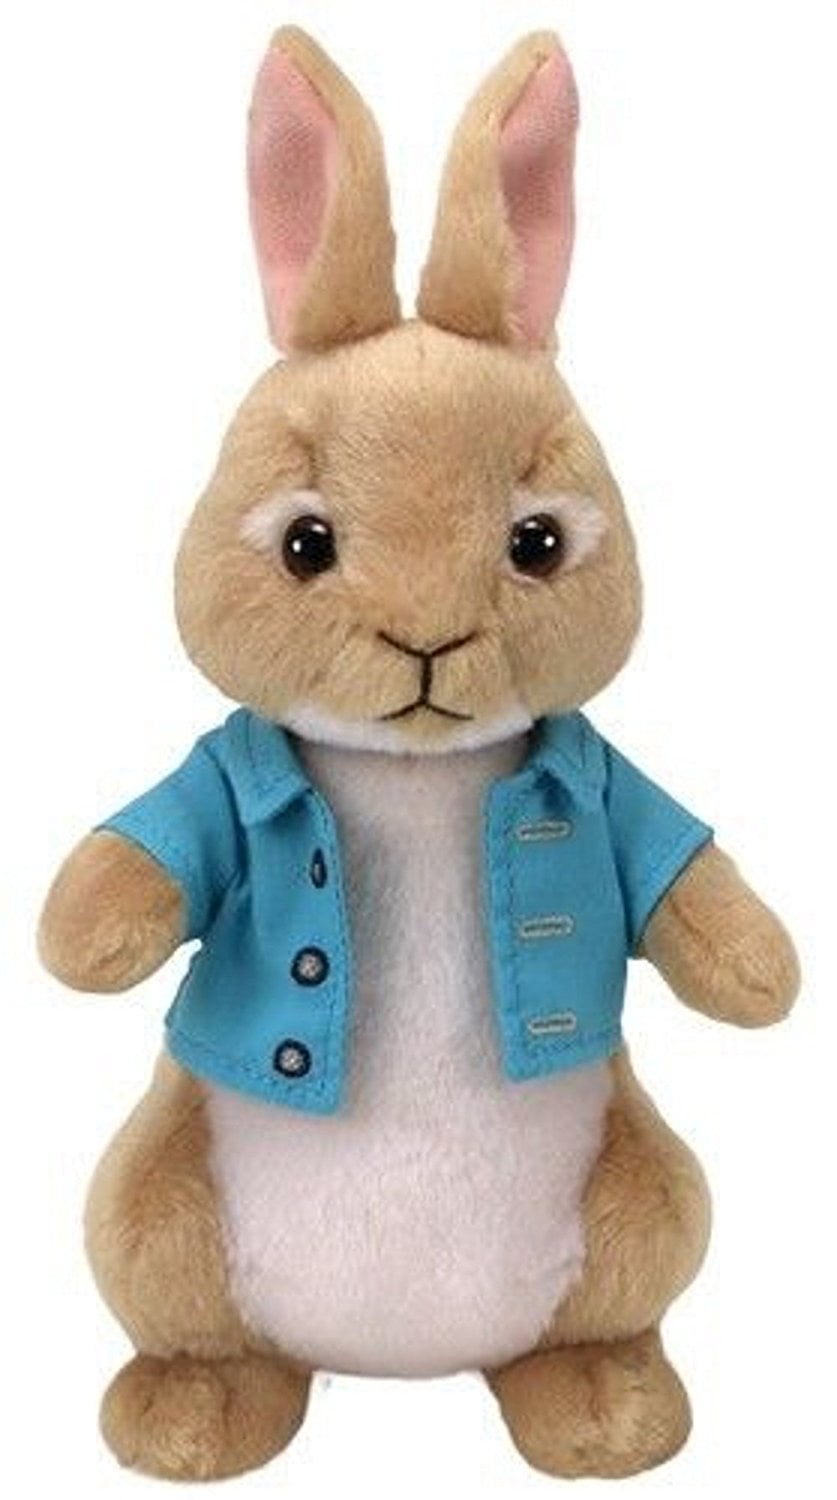 CBeebies washable baby safe soft toy by Rainbow Designs Peter Rabbit 